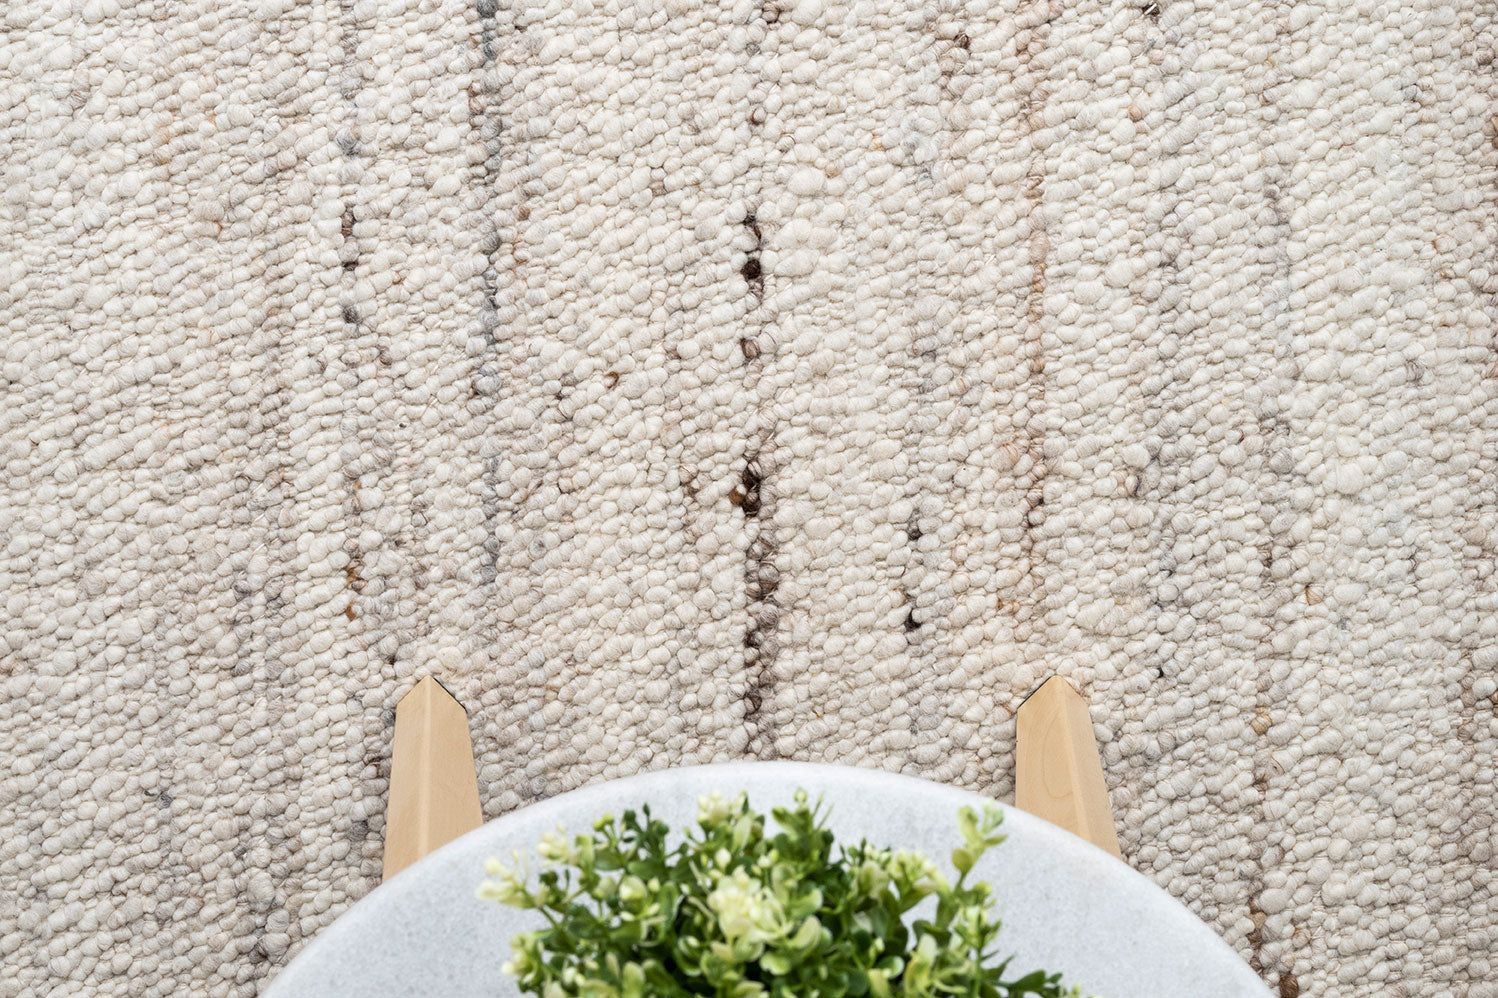 Close-up view of the intricate handwoven texture and rich Mushroom colour of Noosa Mats & Rugs' Belgium Wool Rug, highlighting its fine craftsmanship and quality.